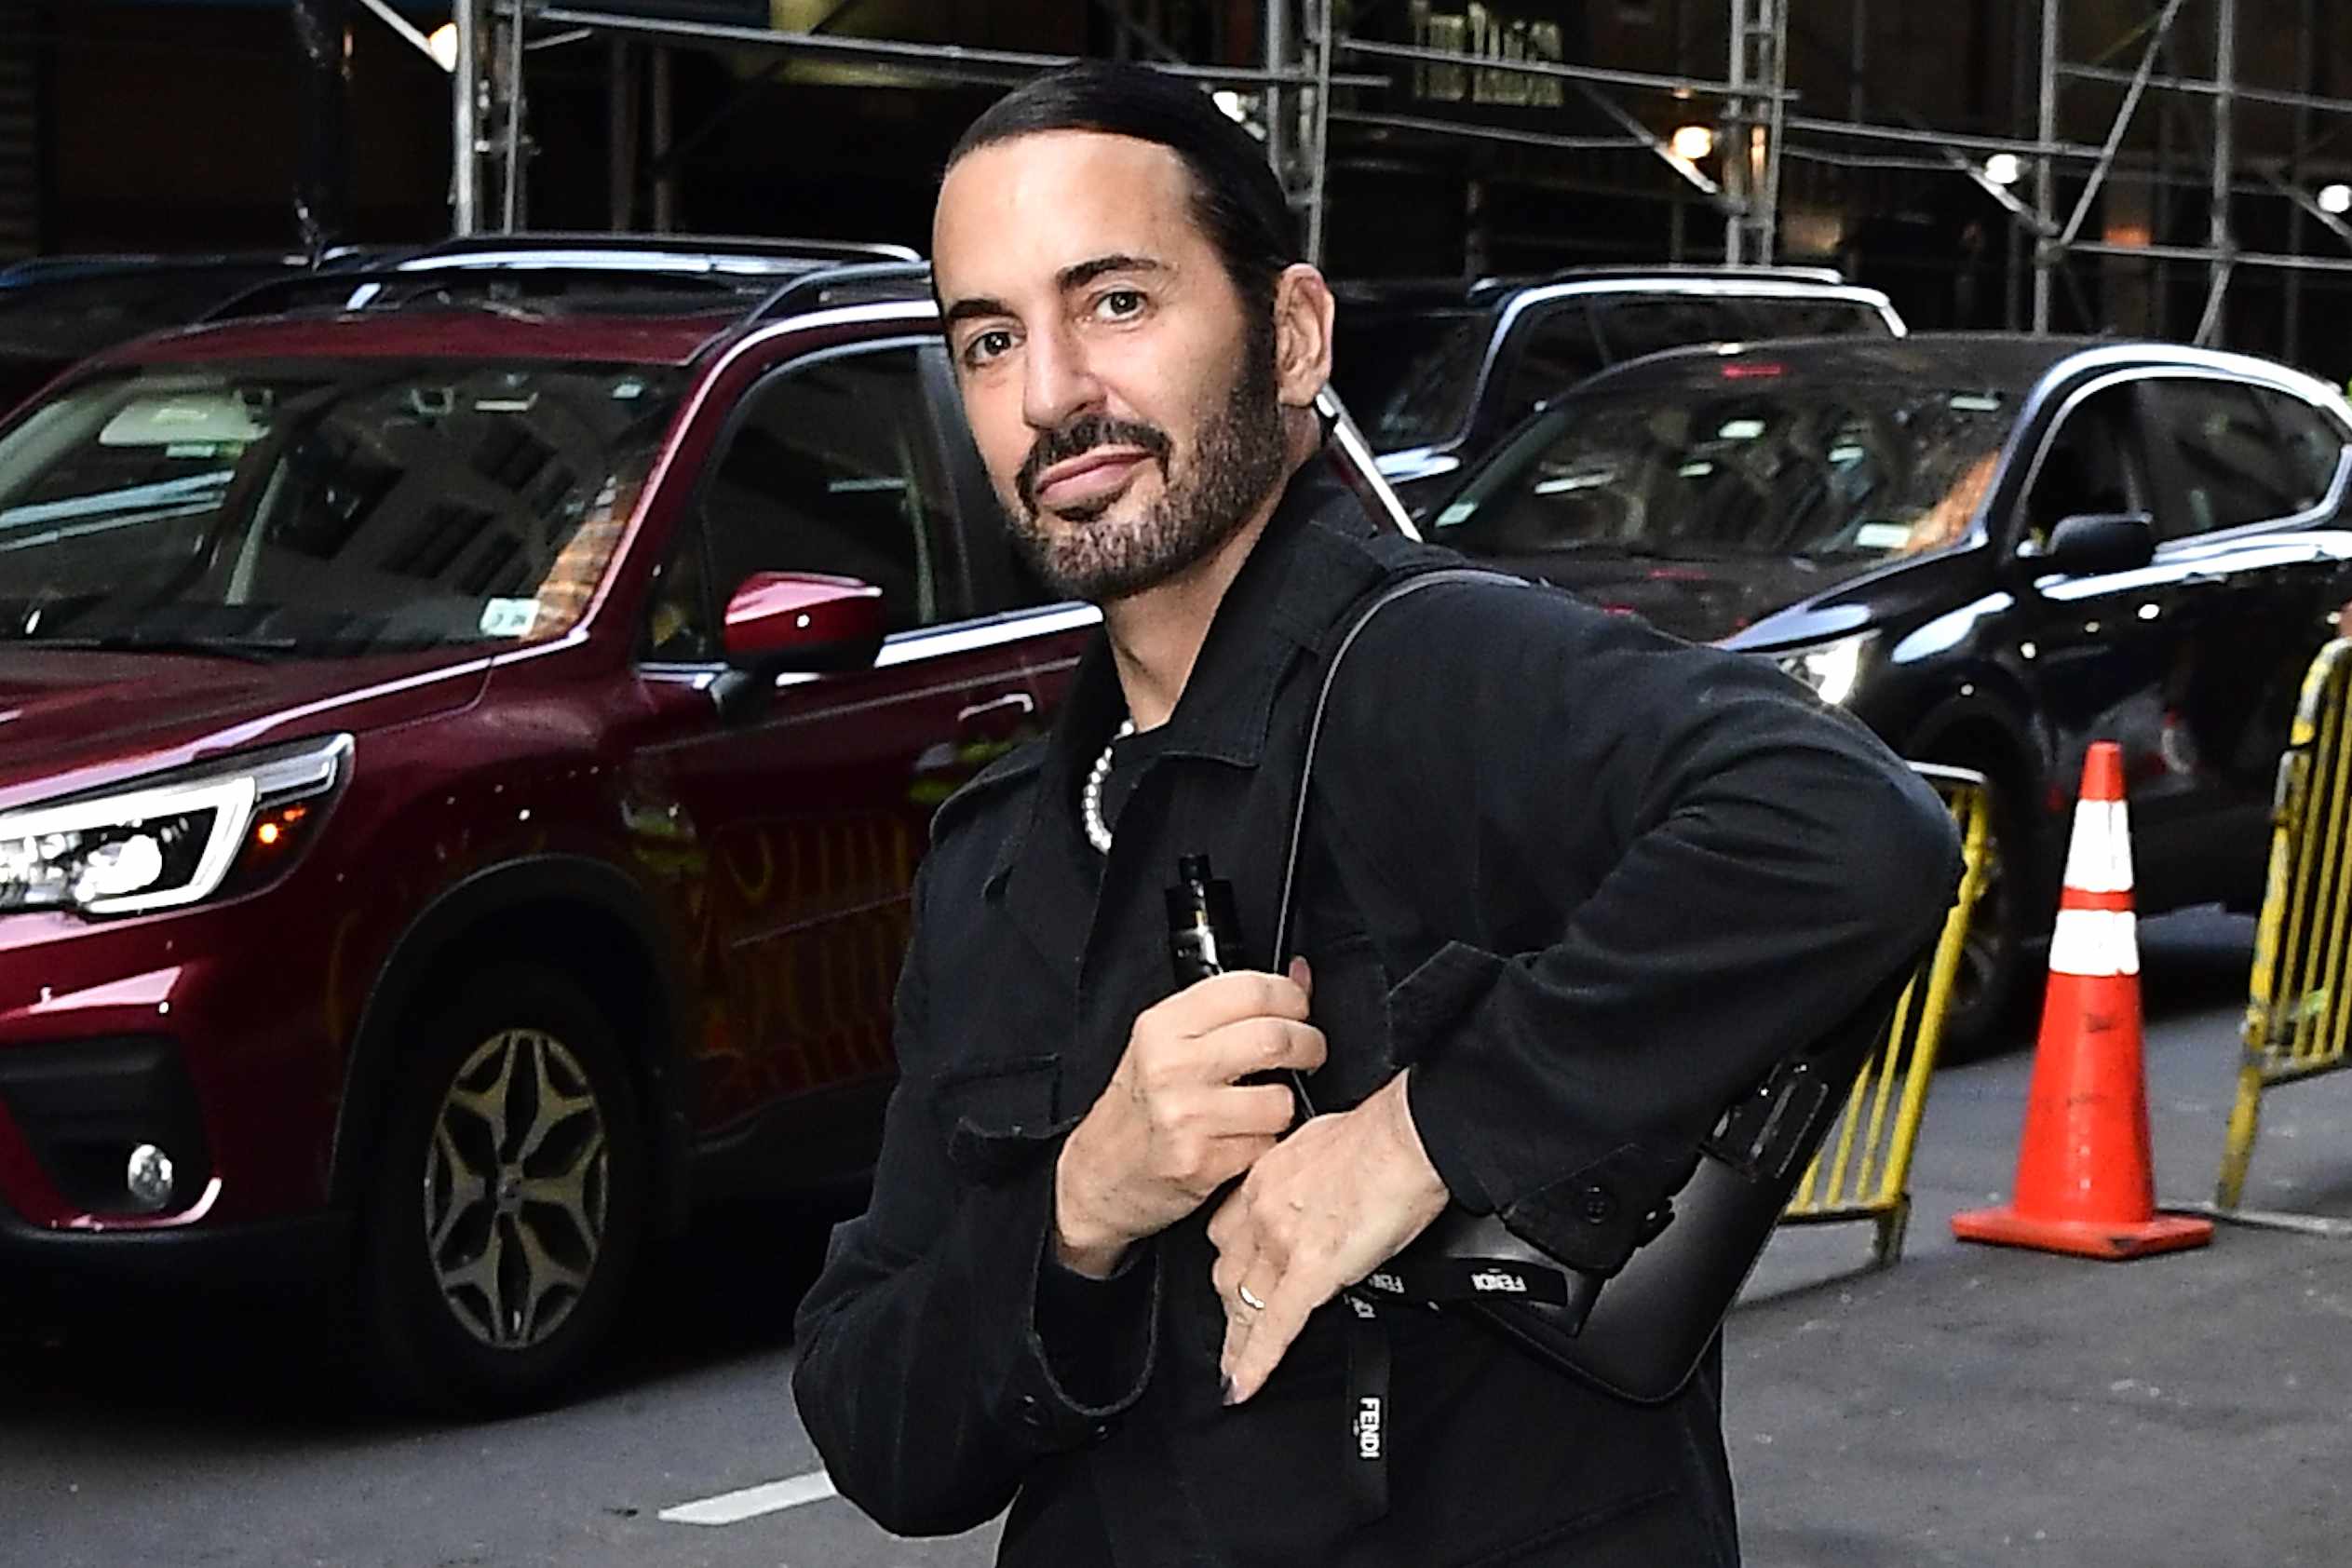 Designer Marc Jacobs wears a black outfit with a dark Fendi handbag in New York